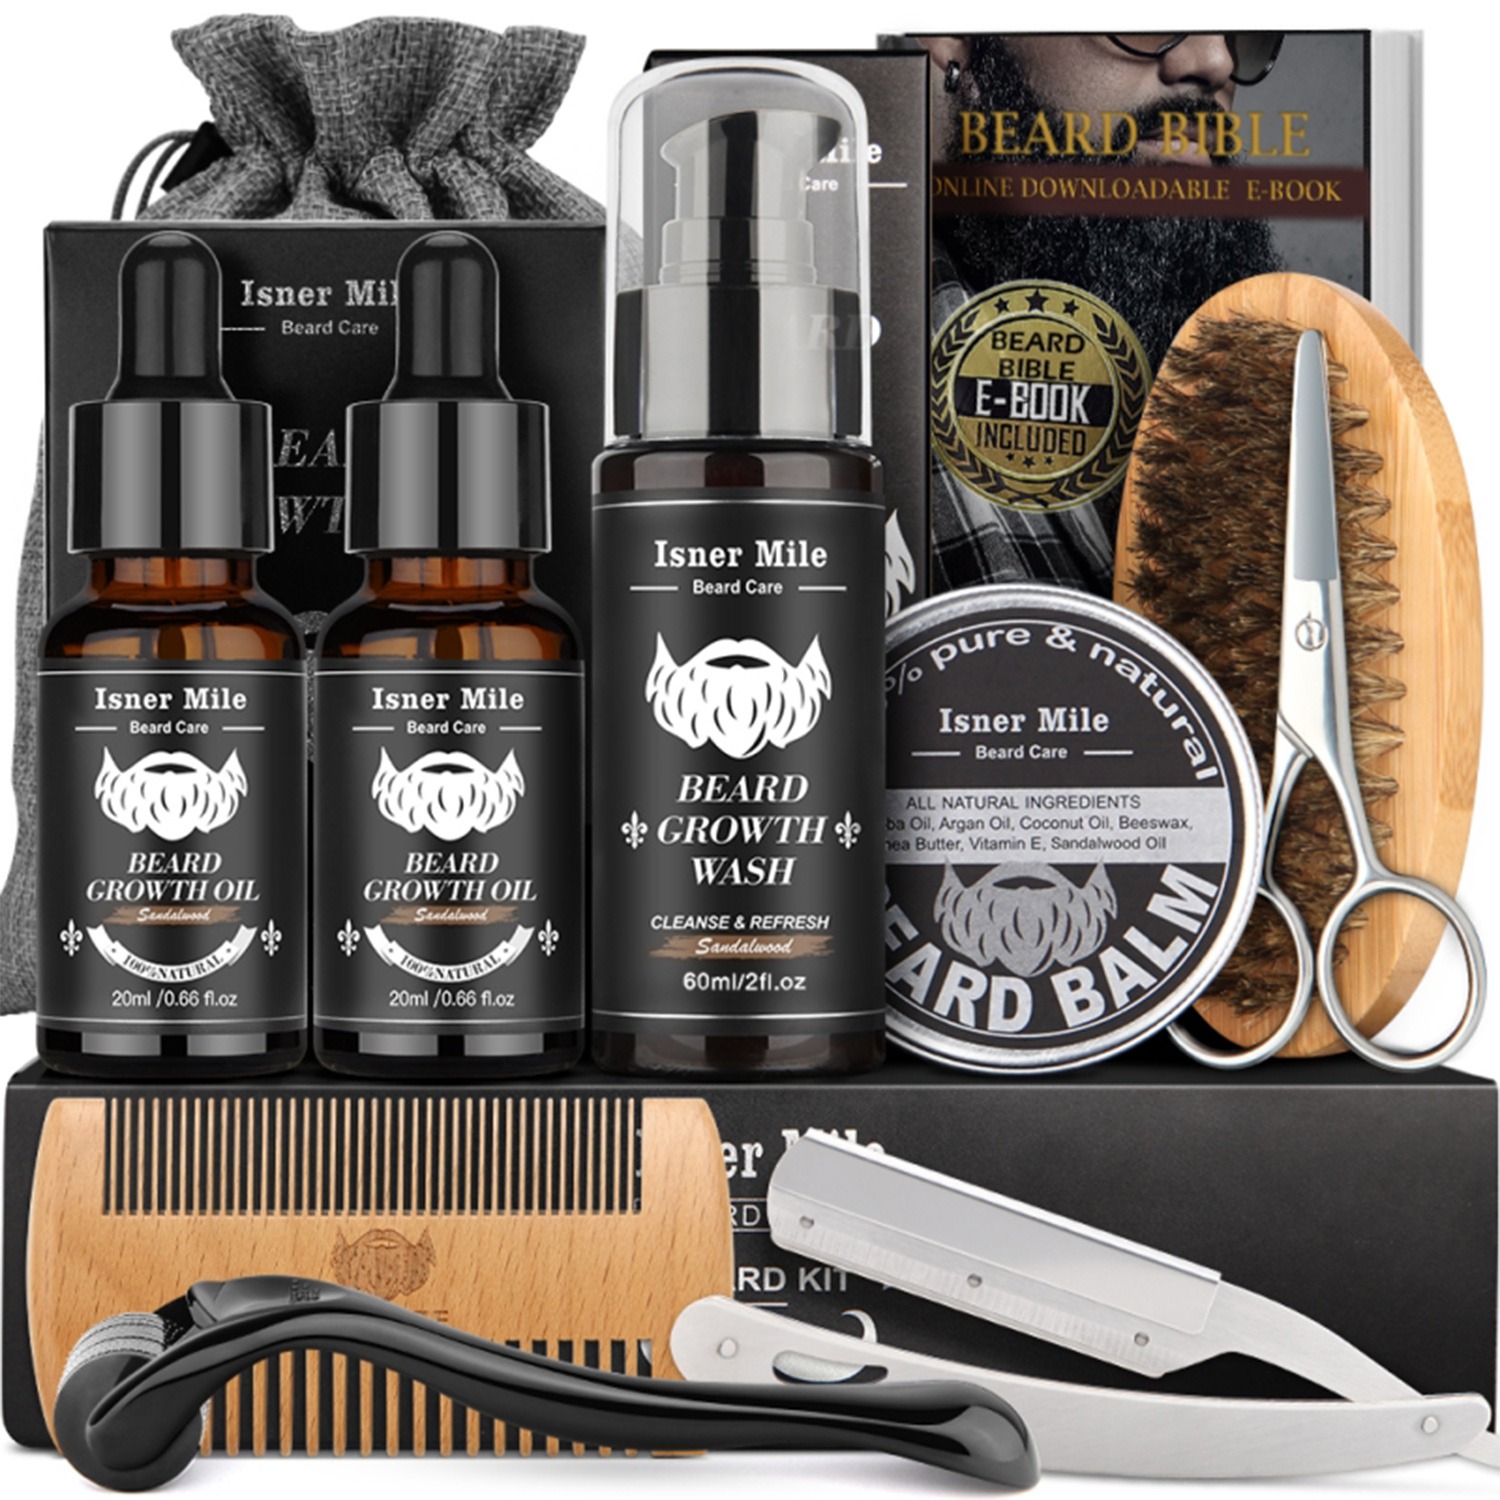 Oil Can Grooming - Quality Hair Styling & Beard Care Products